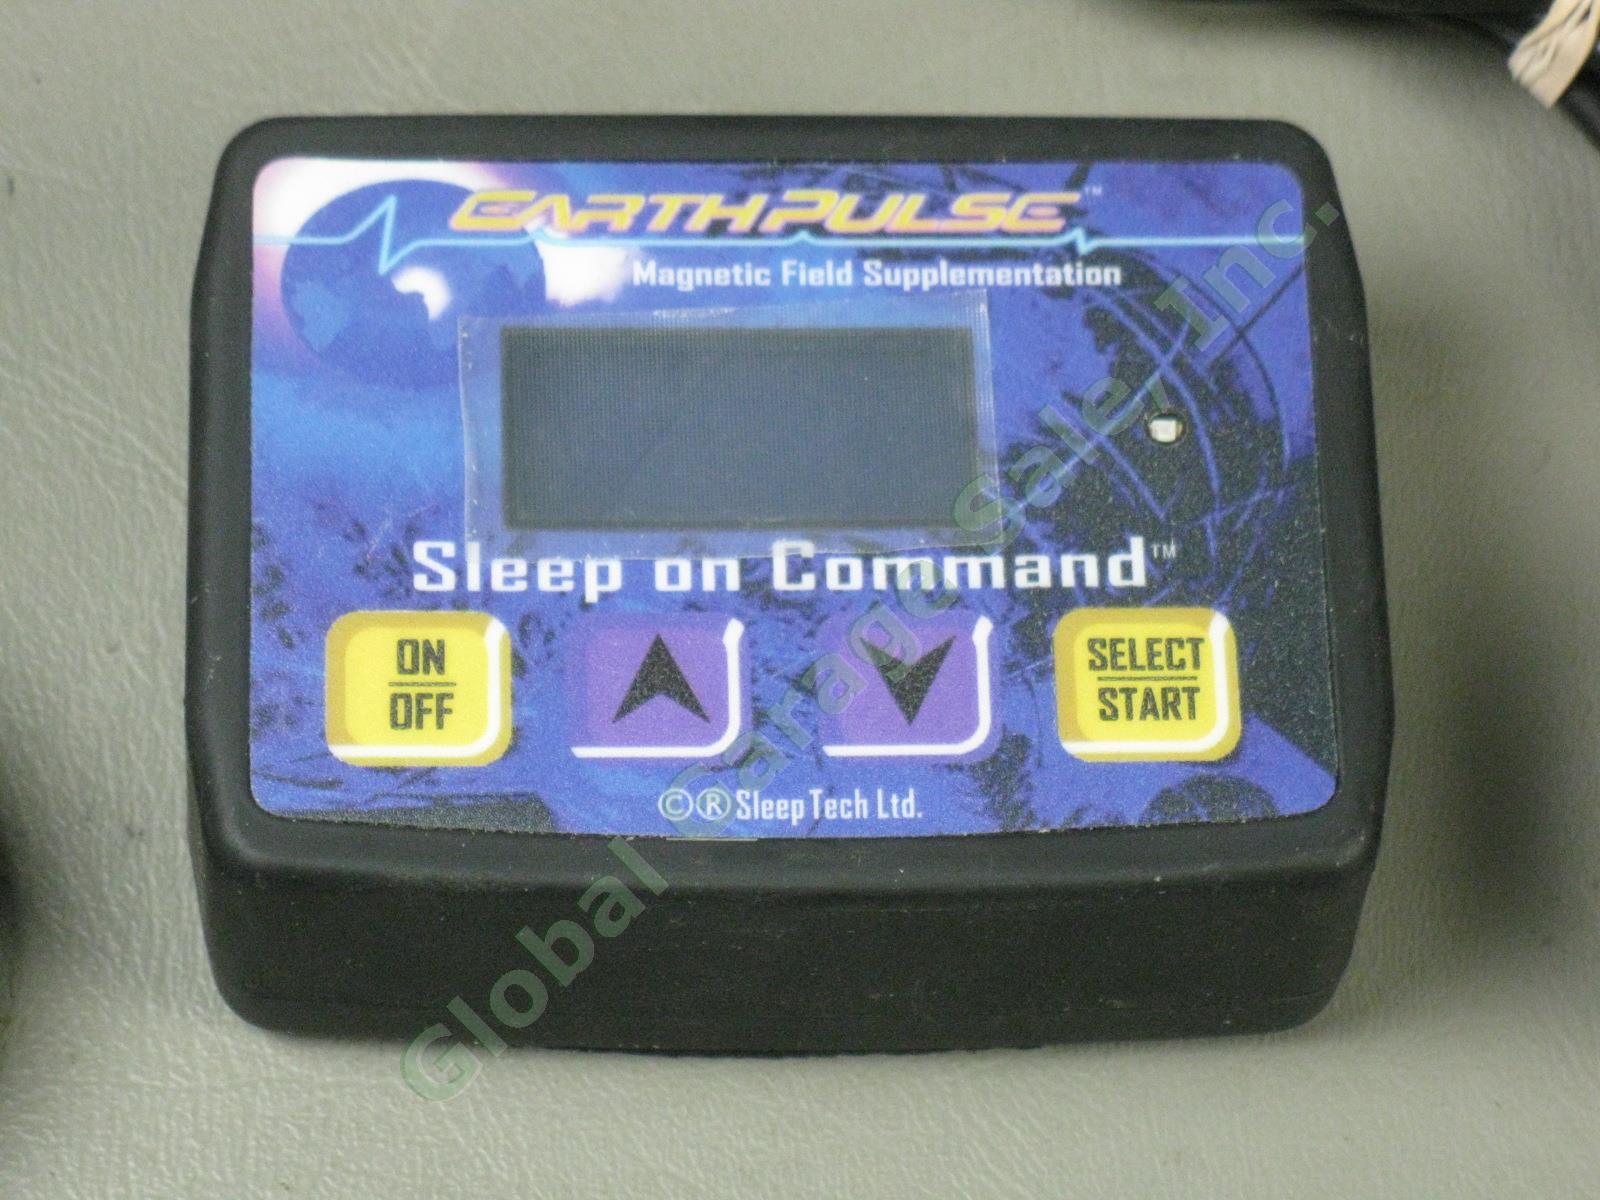 EarthPulse Magnetic Field Supplementation Sleep on Command System PEMF Therapy 1